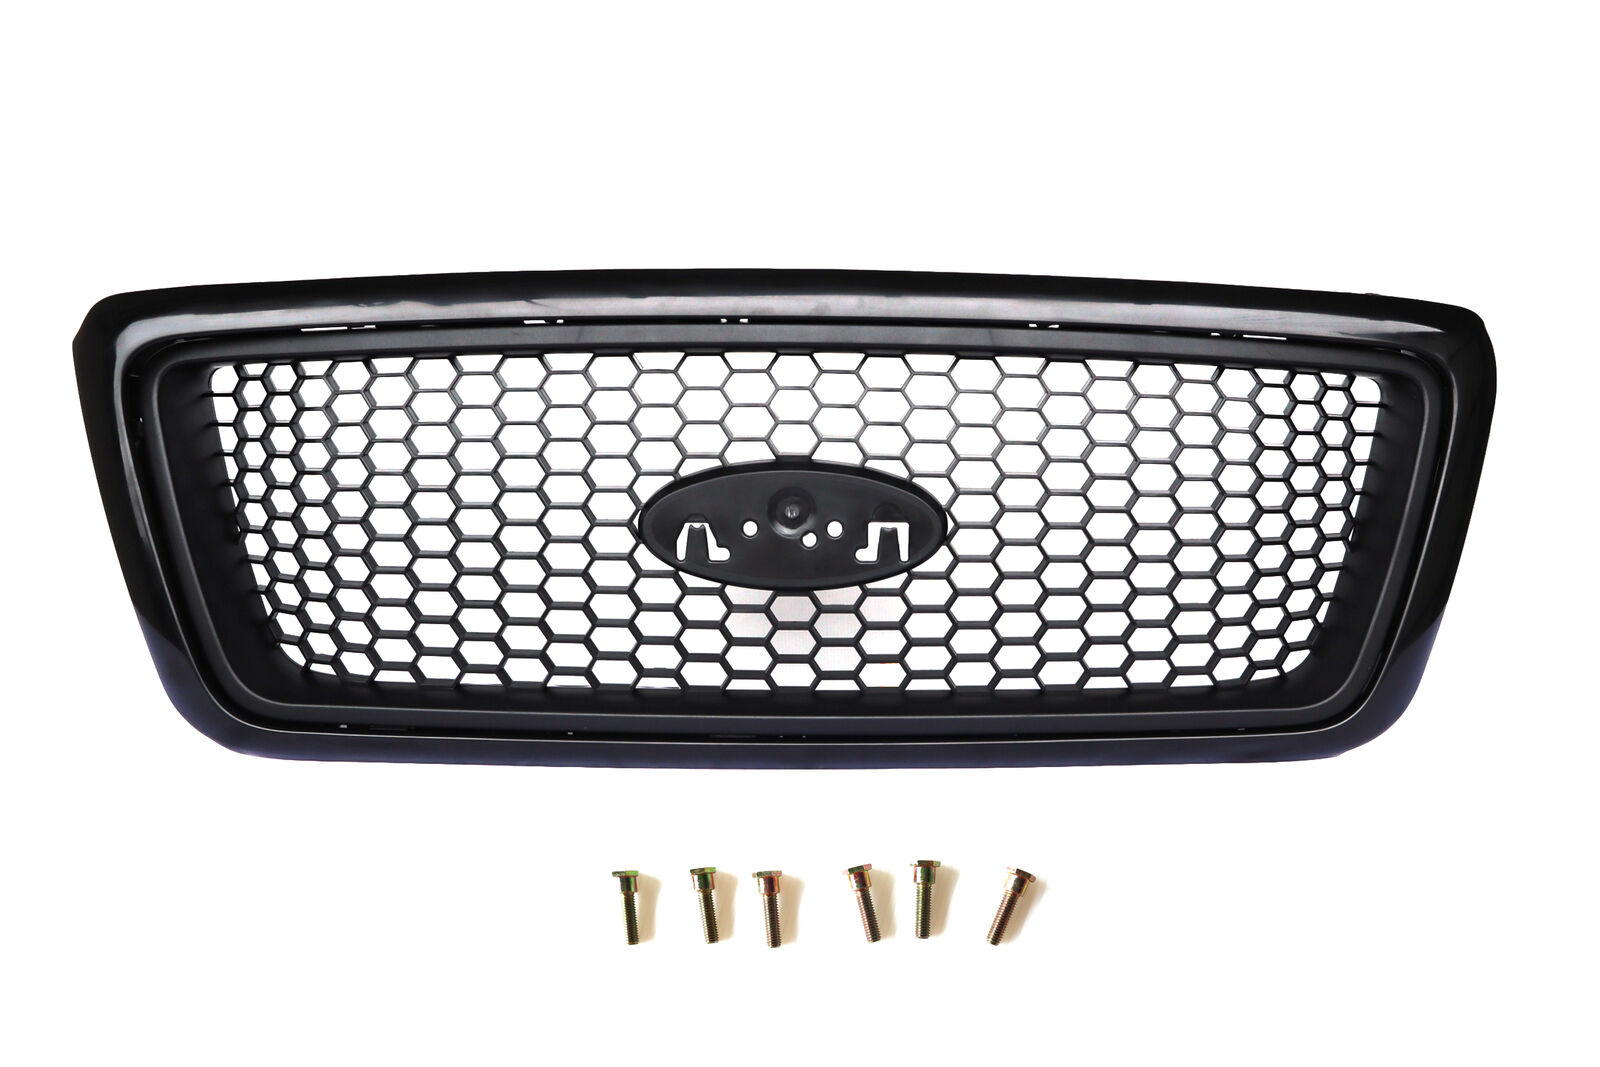 Black Grille Grill Honeycomb Insert For 2004-2008 Ford F-150 F150 Pickup Truck